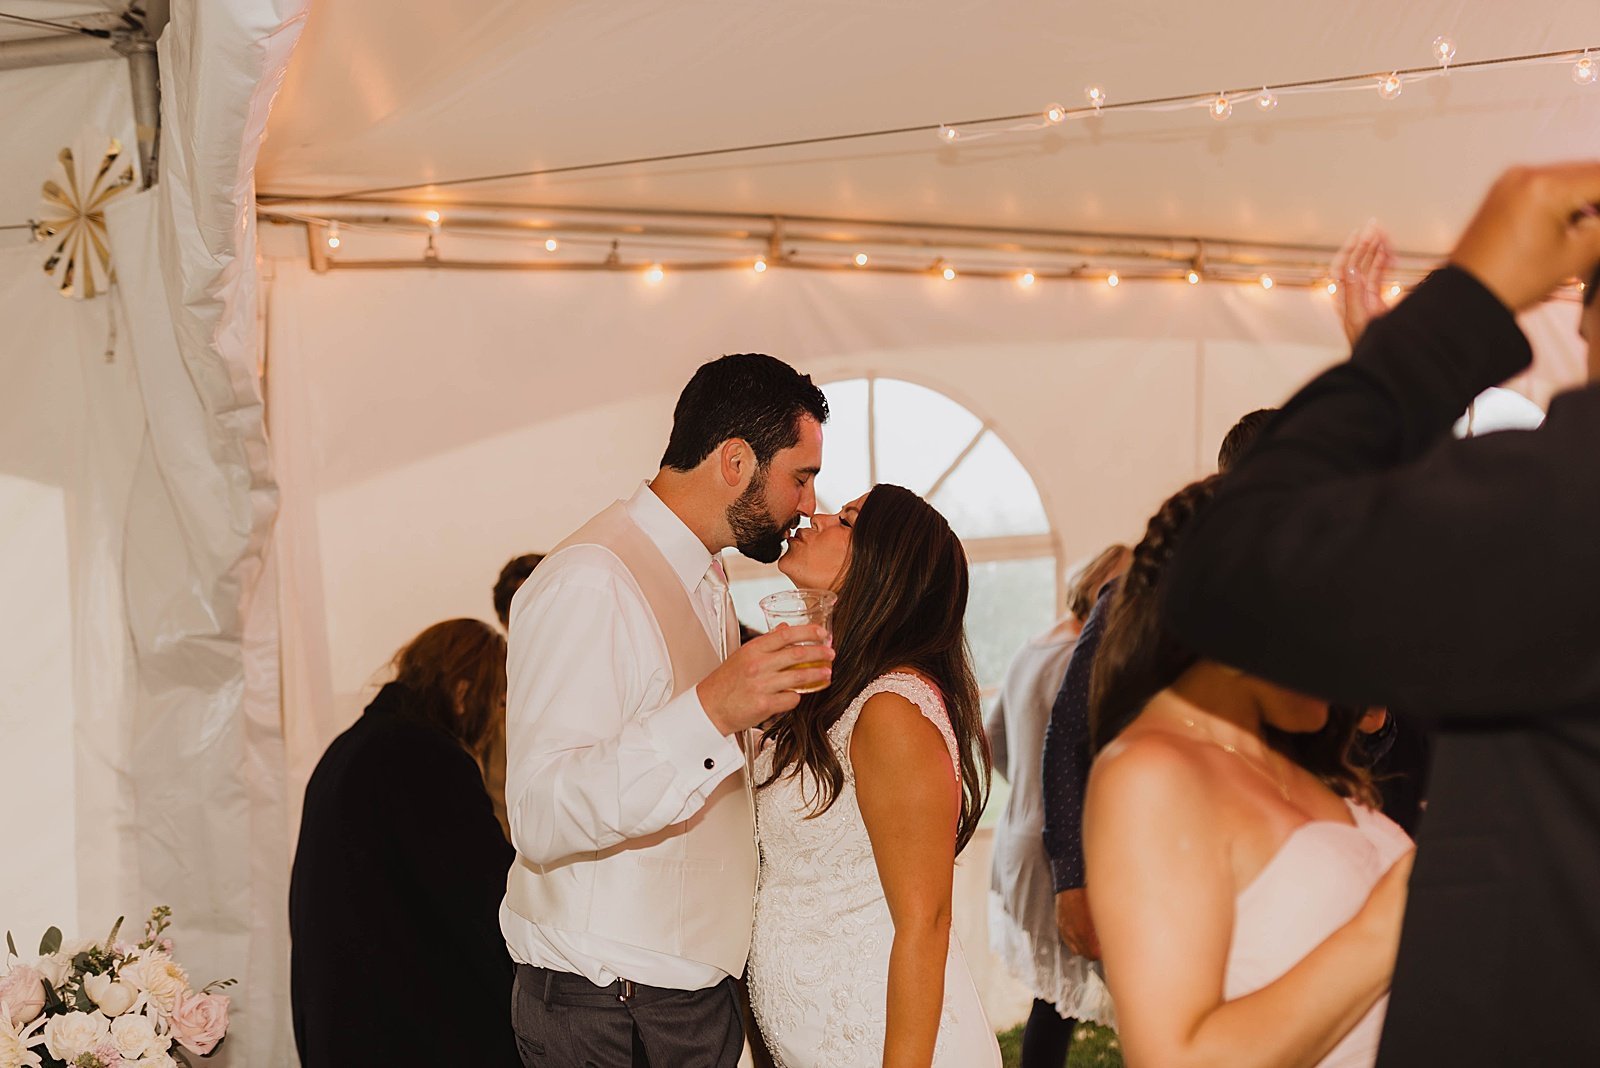  Newlyweds stealing a kiss during their wedding reception  